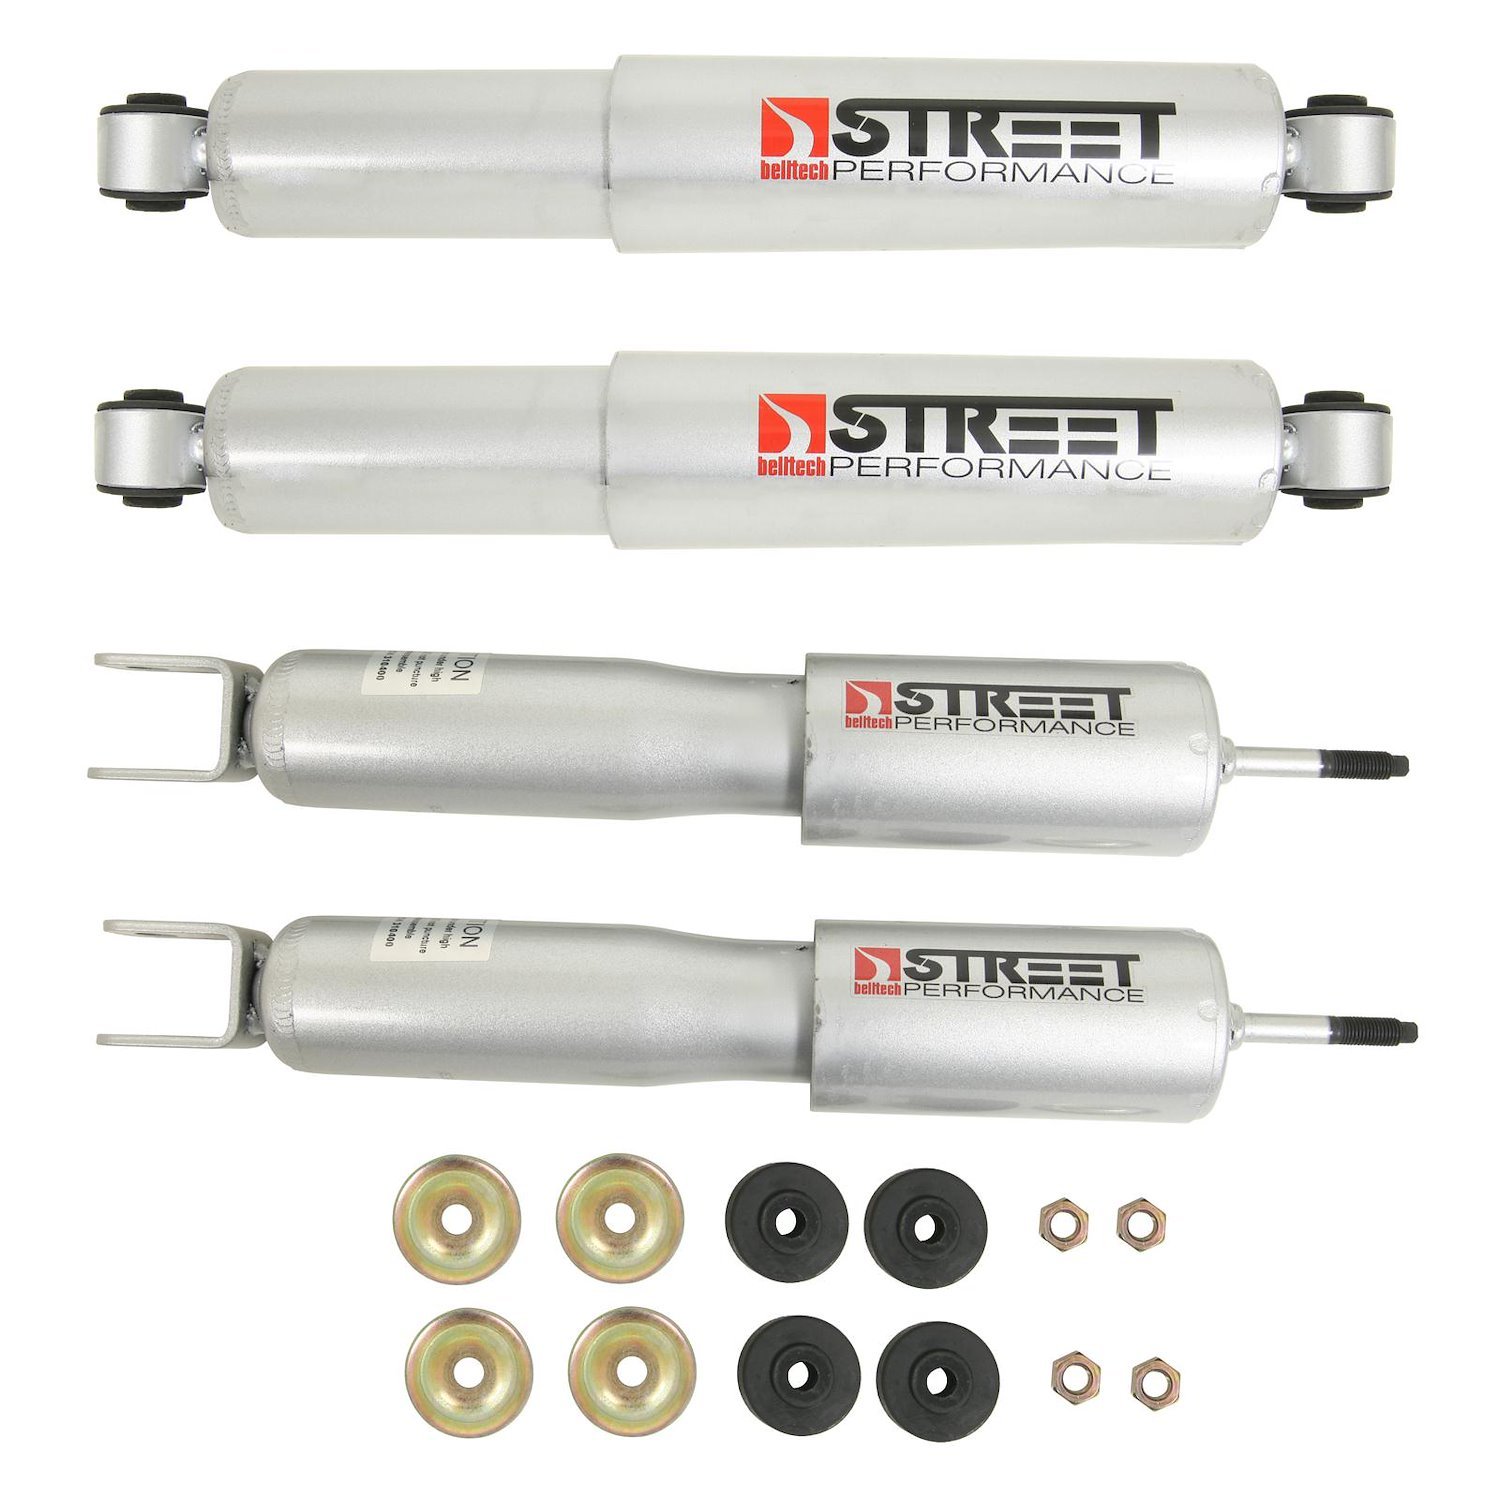 Street Performance Shock Set includes (2) 146-25003 Front Shocks and (2) 146-2414IF Rear Shocks